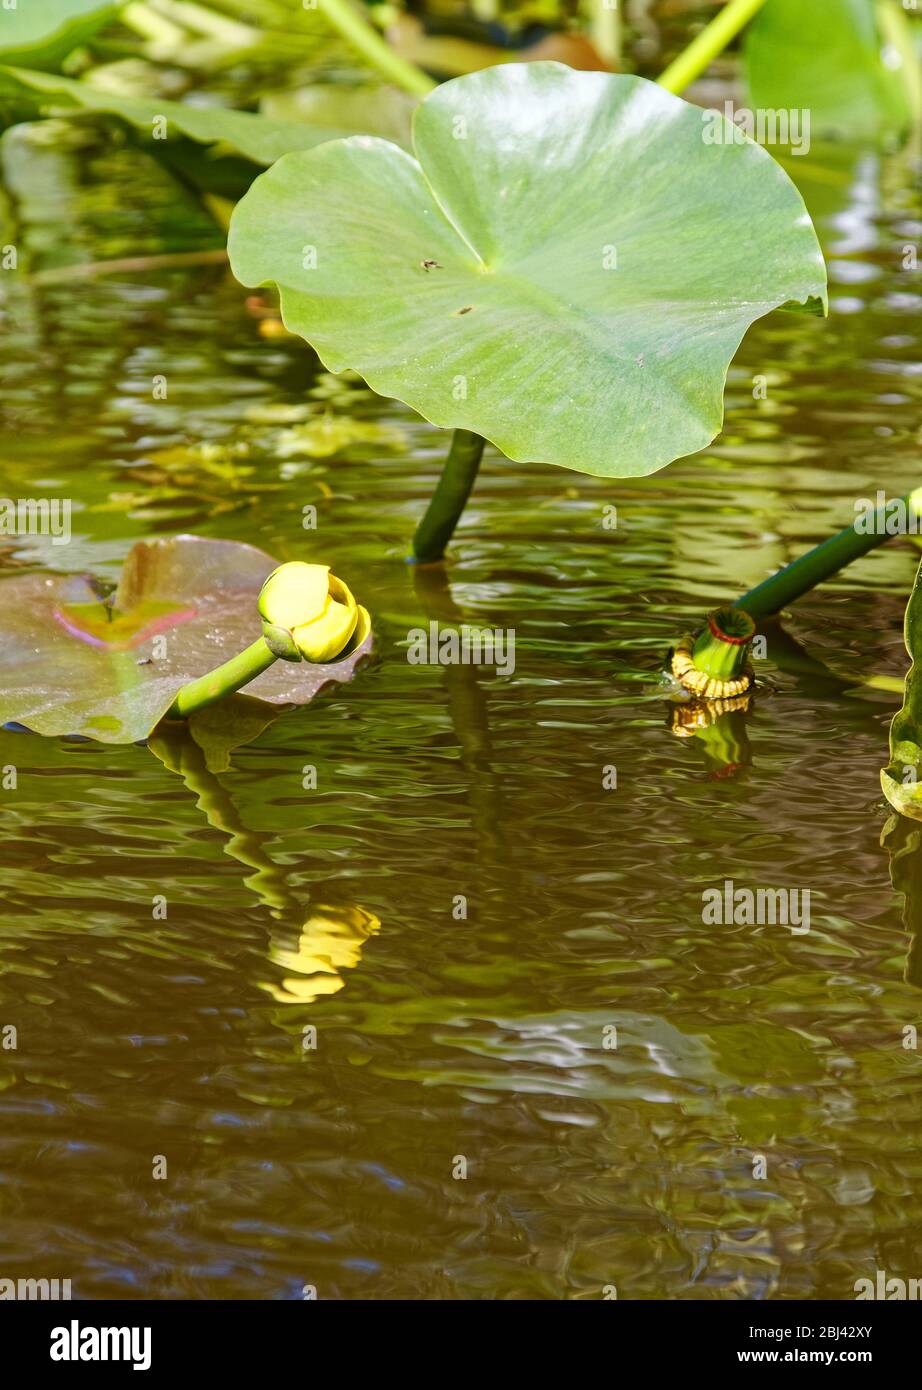 Spatterdock, yellow pond lily, yellow cow-lily, Nuphar luteum, cup-like flower, large green leaves, reflections, nature, Peace River, southwest Florid Stock Photo